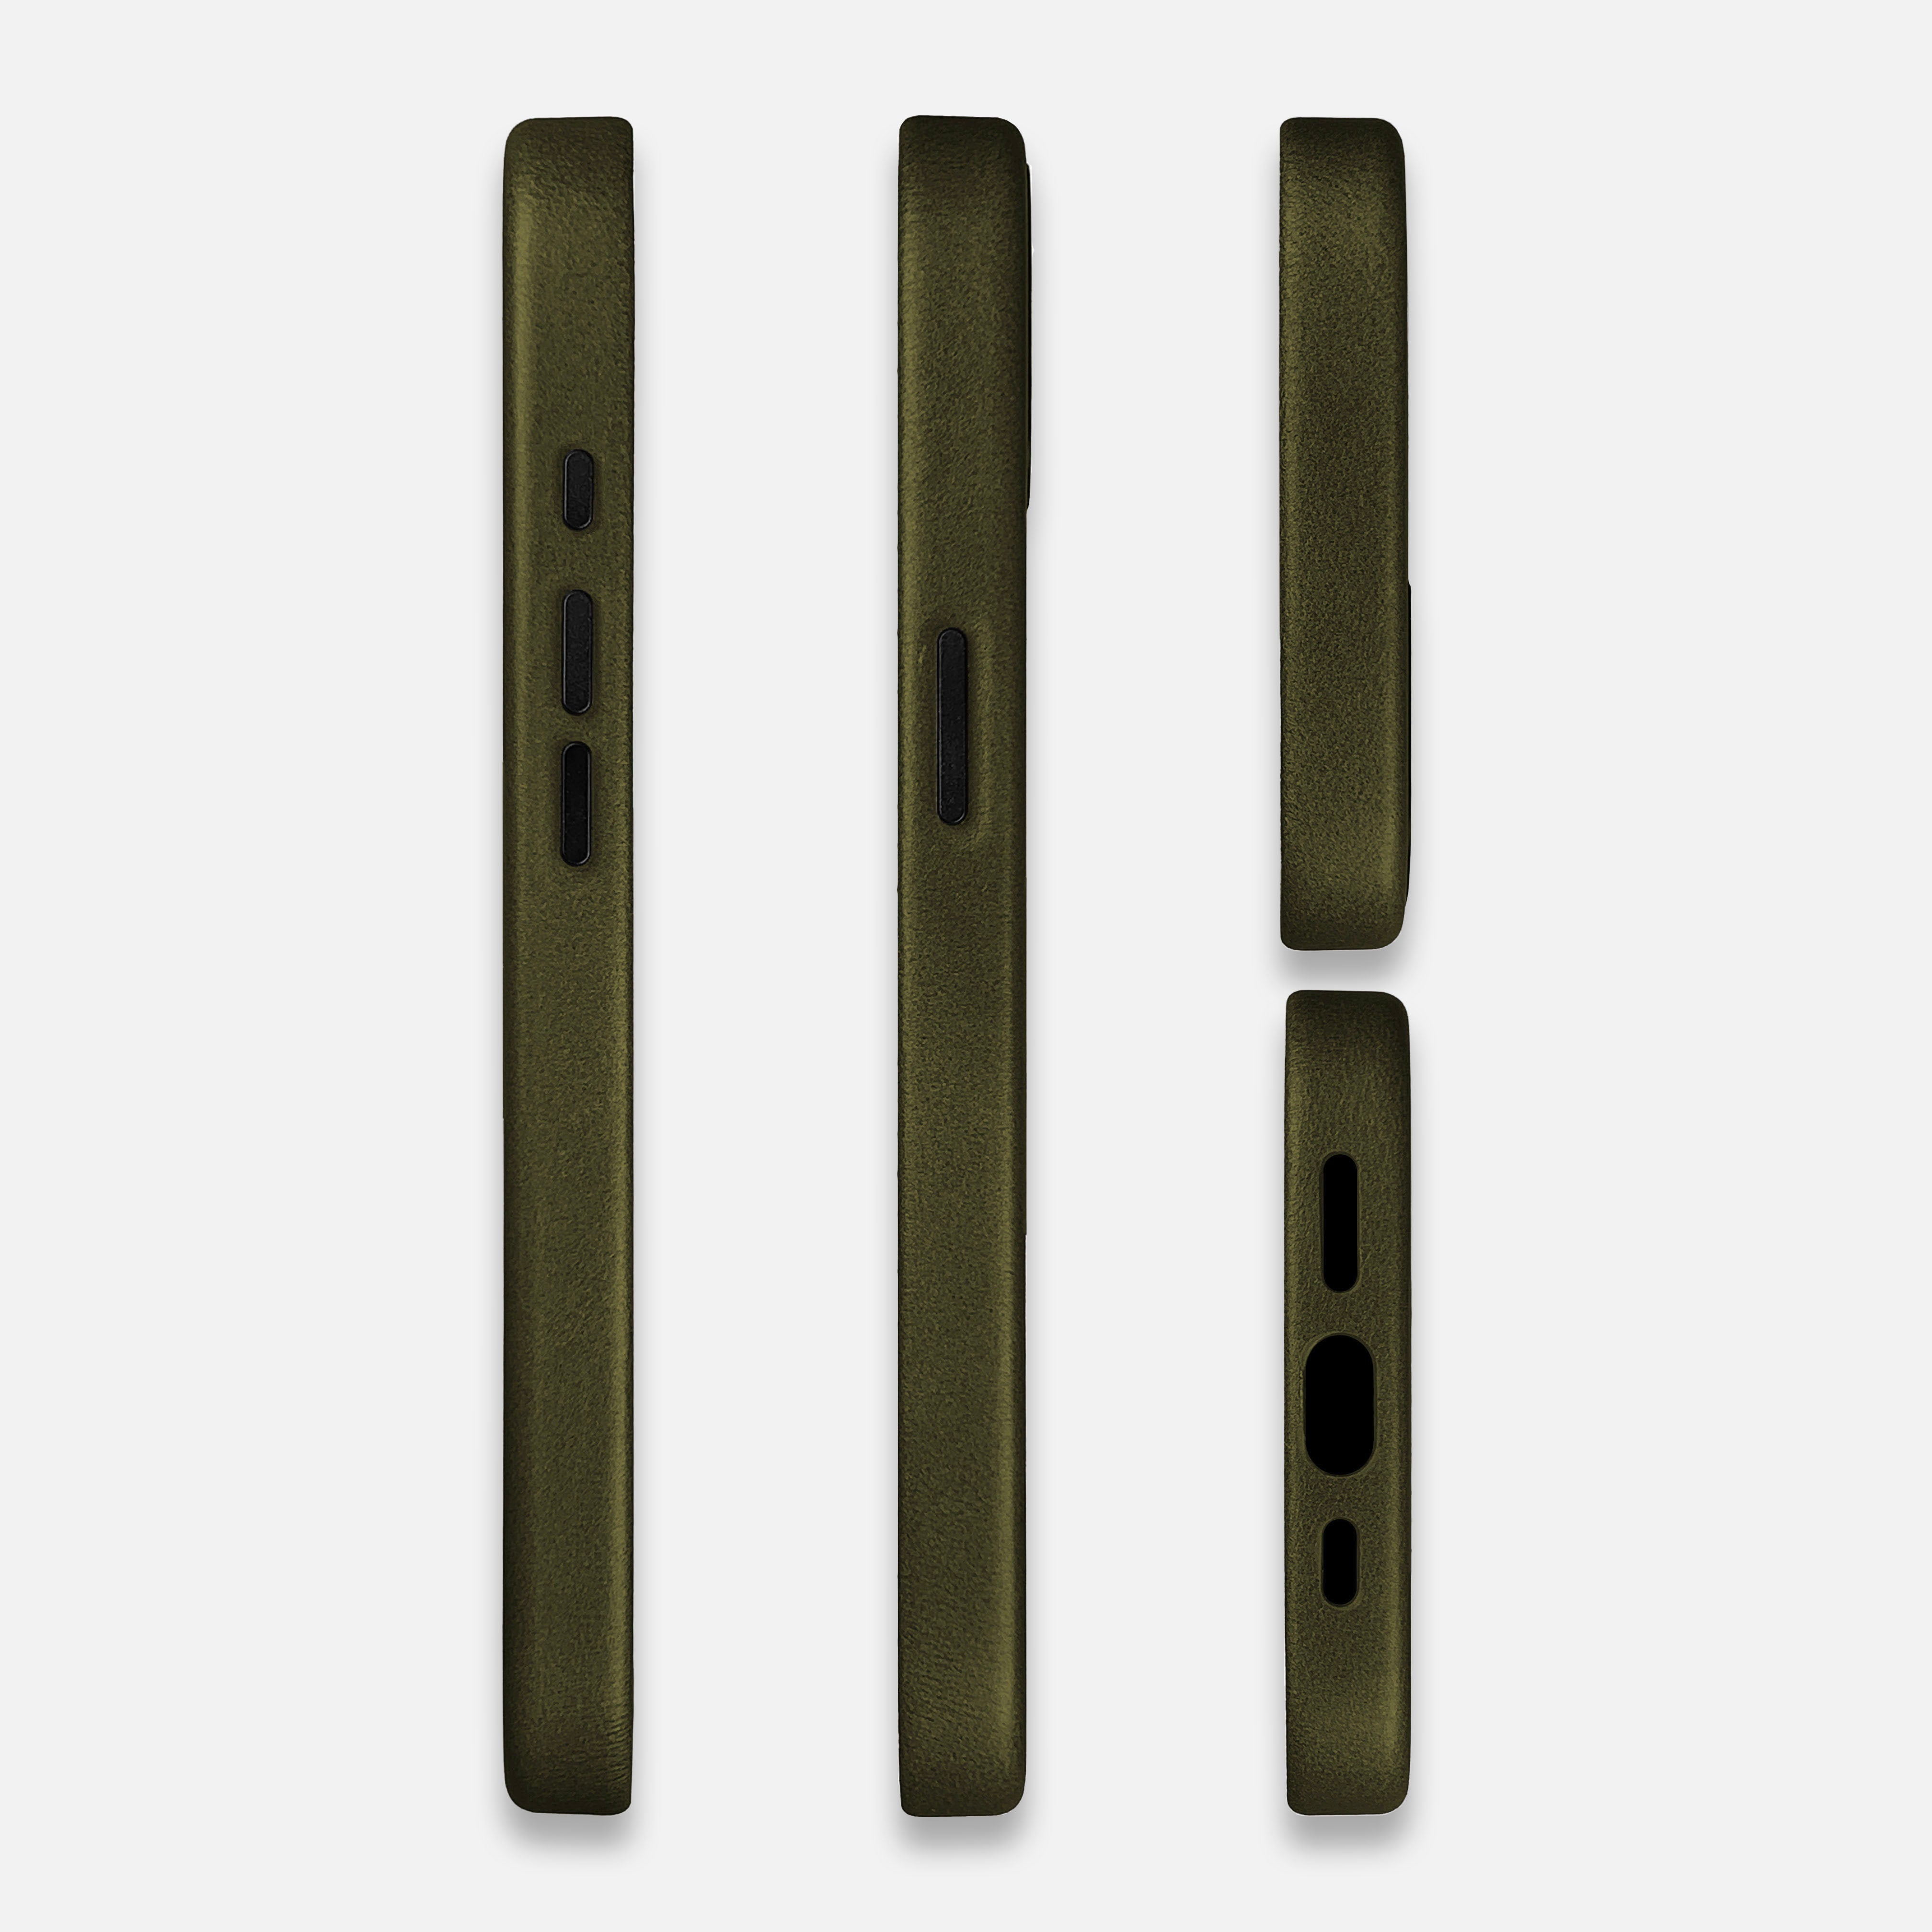 All sides of the Keyway Olive Green Leather iPhone Case